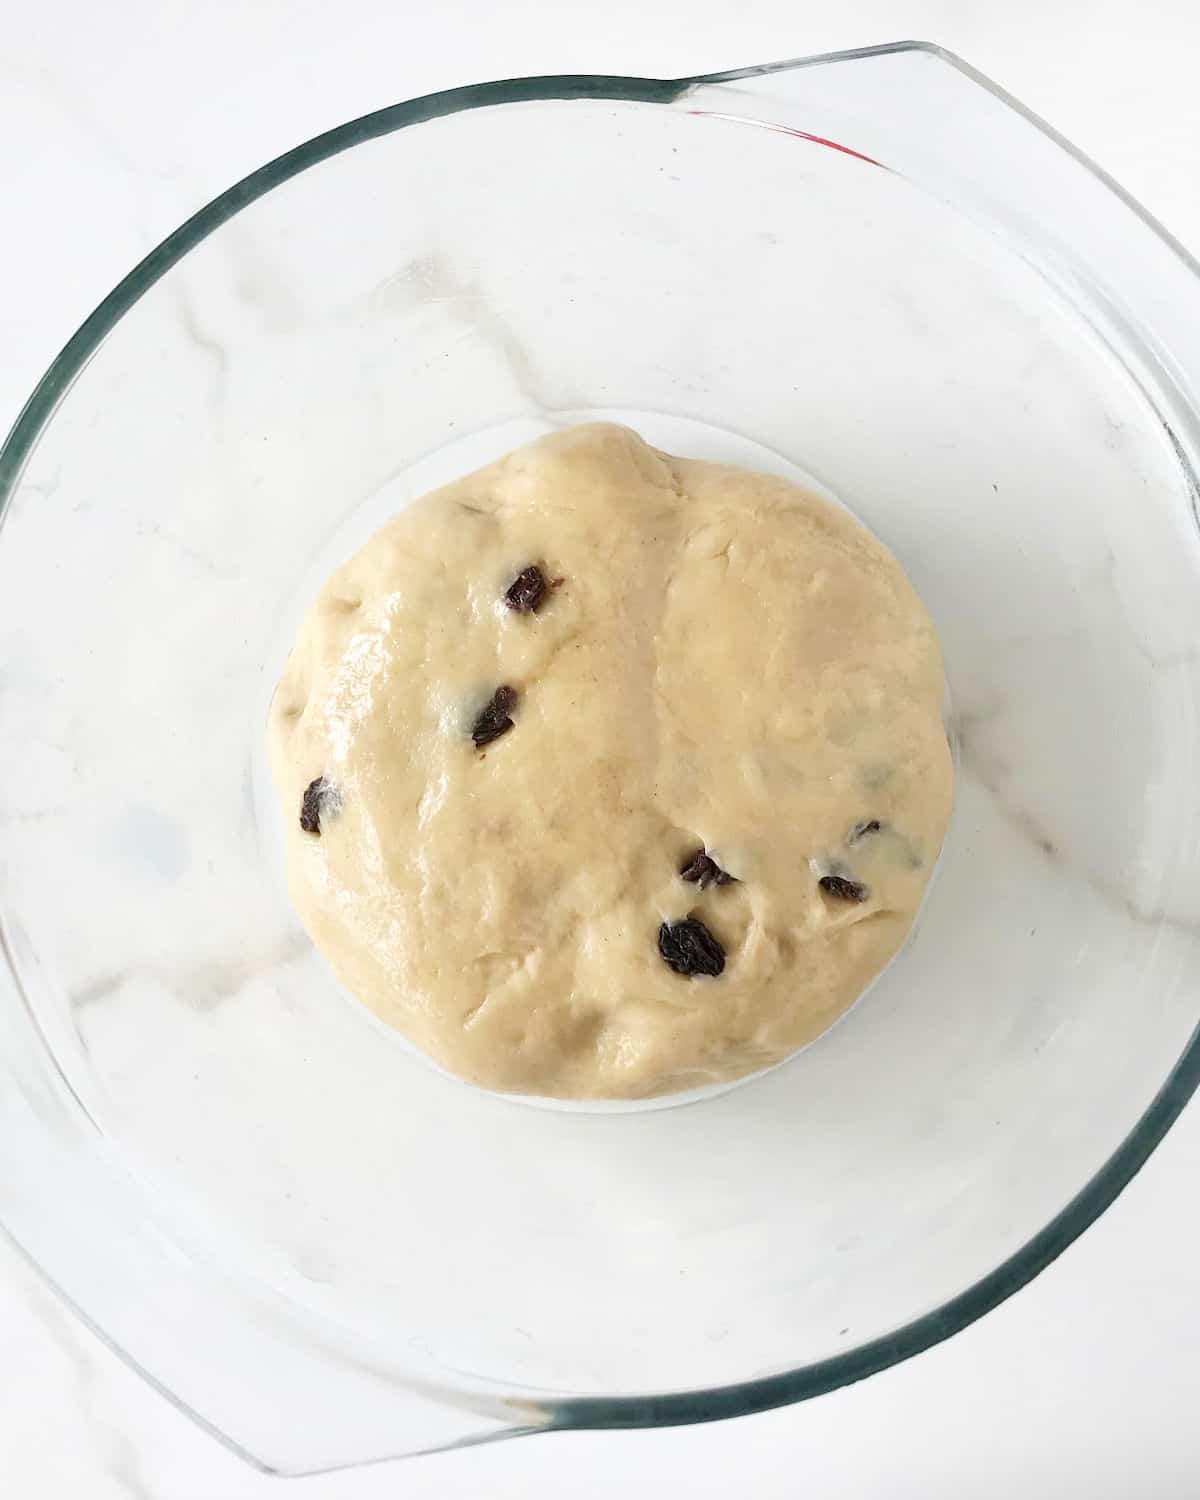 Round of hot cross buns with raisins in a glass bowl set on white marble.